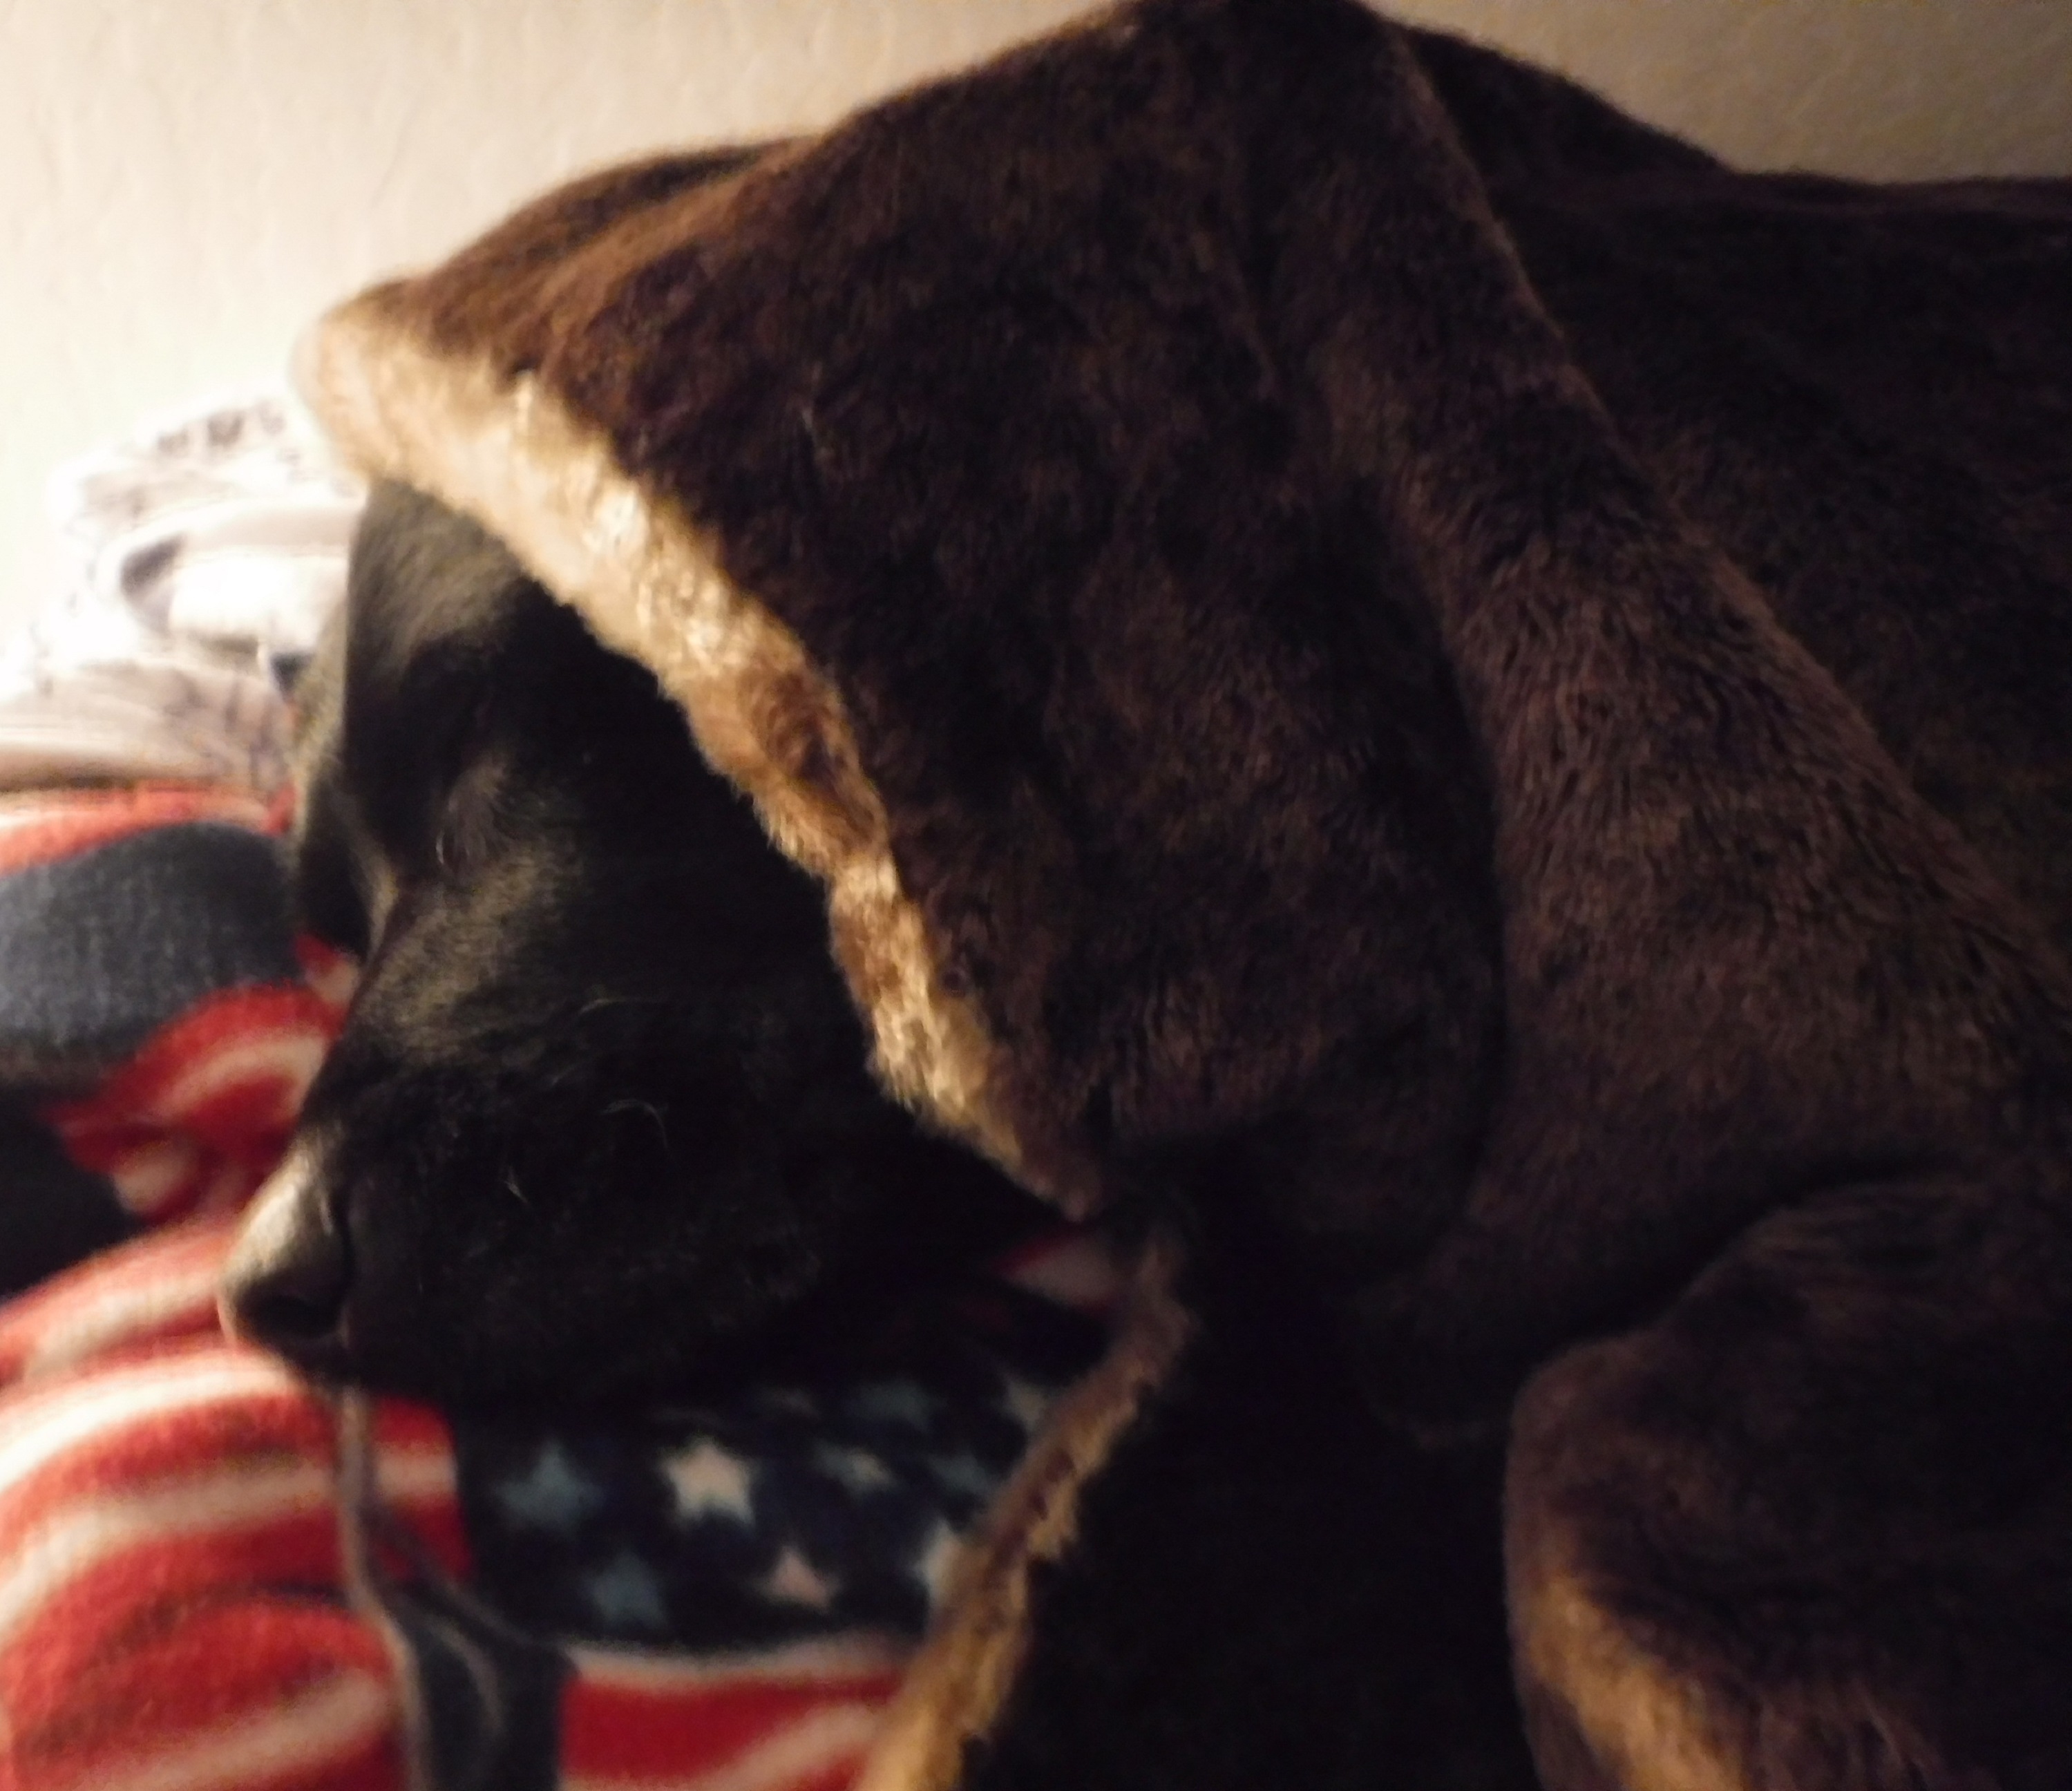 Photo taken by me of Angel on my bed under a blanket